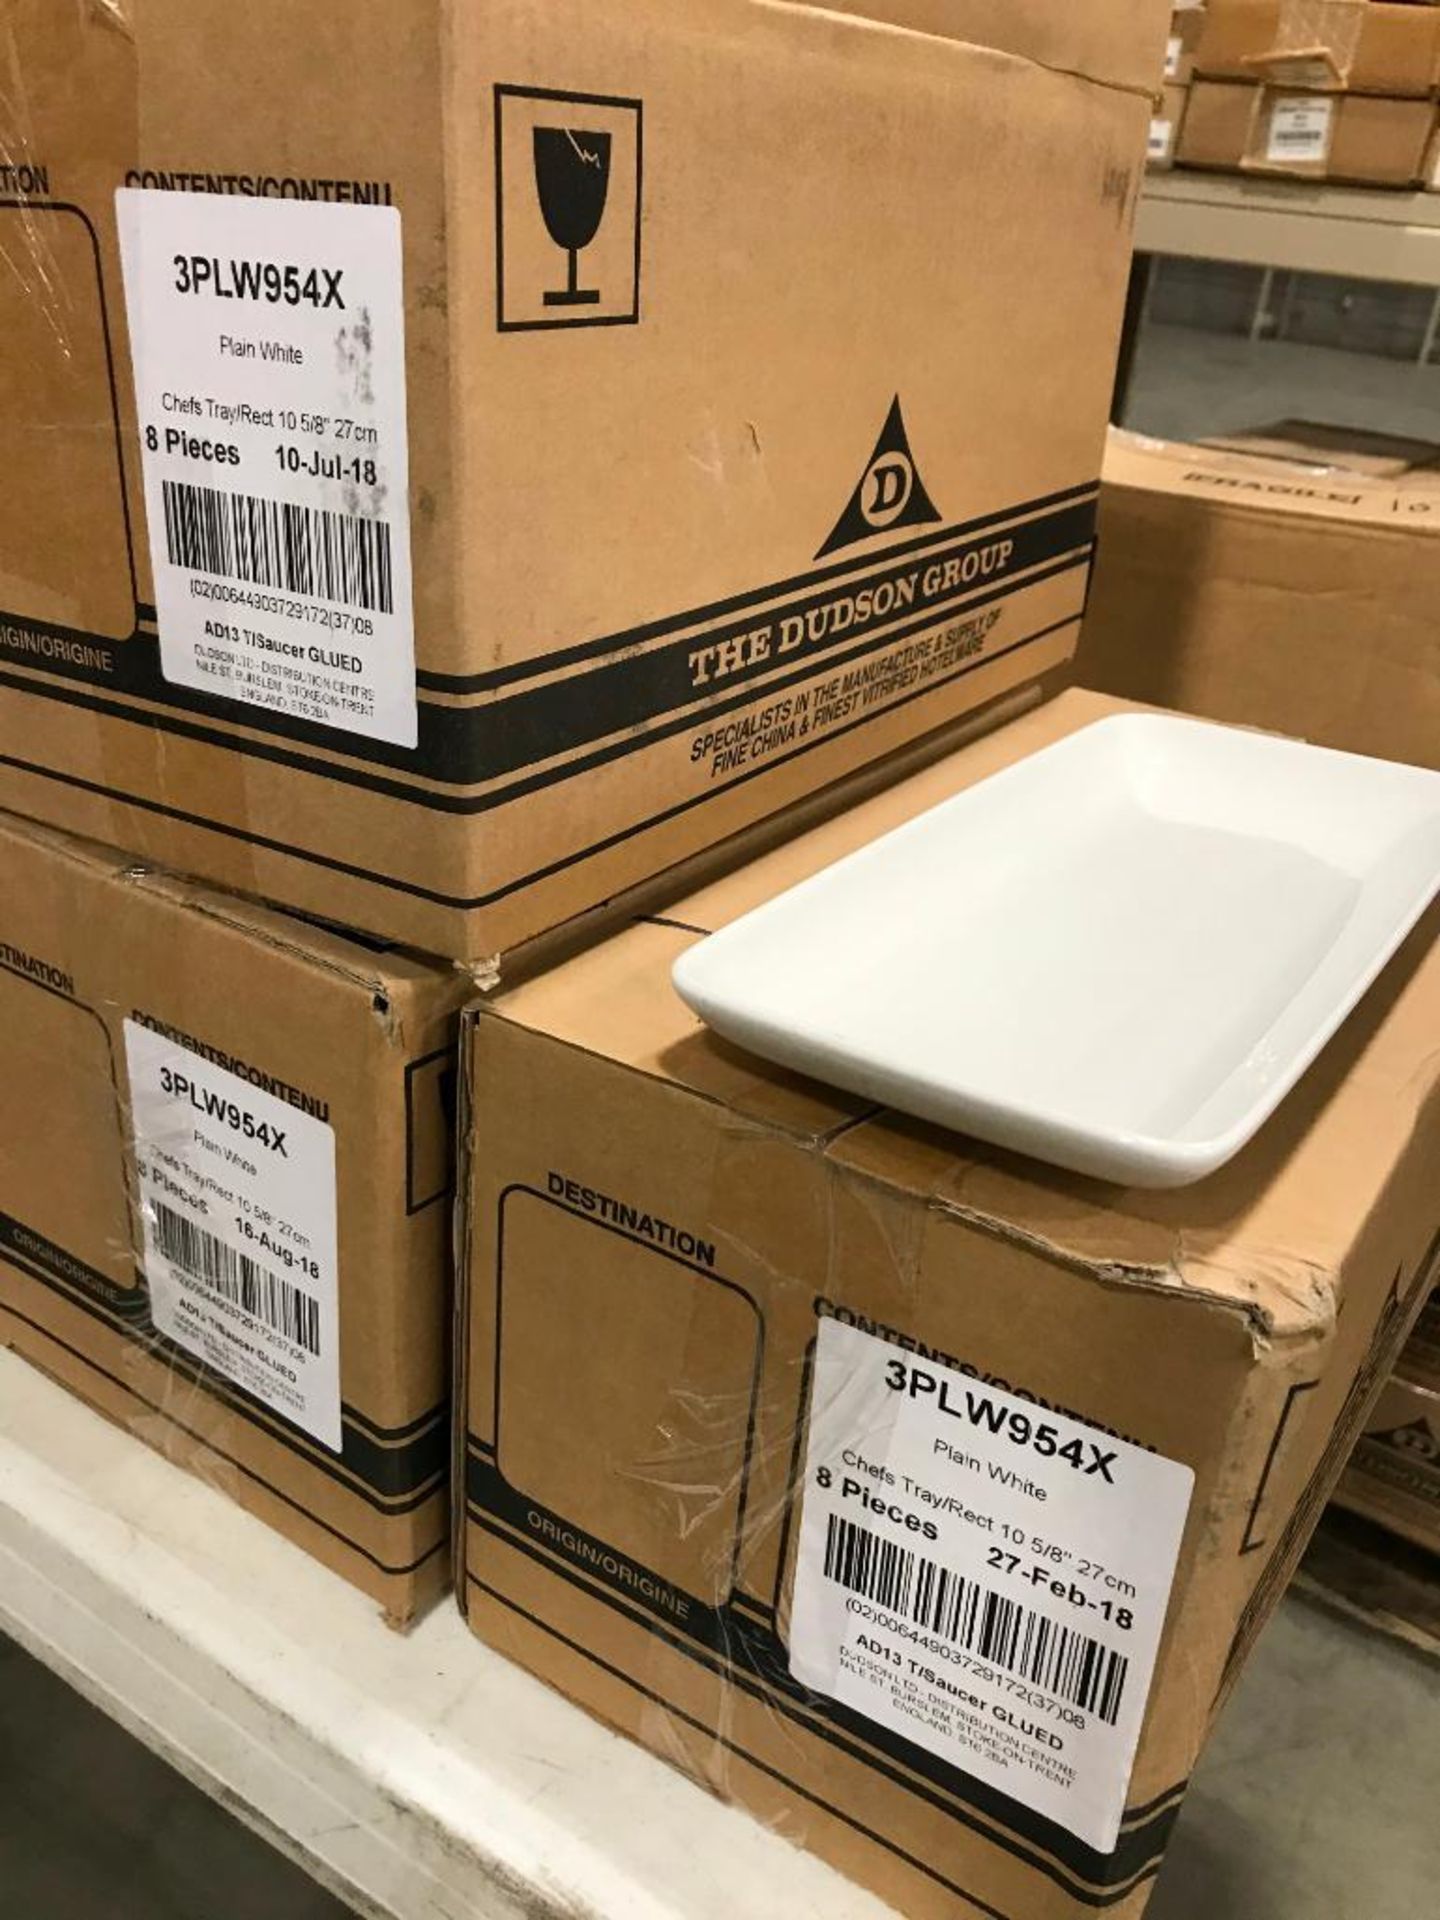 3 CASES OF DUDSON GEOMETRIX RECTANGLE CHEF'S TRAY 10 5/8" - 8/CASE, MADE IN ENGLAND - Image 5 of 5